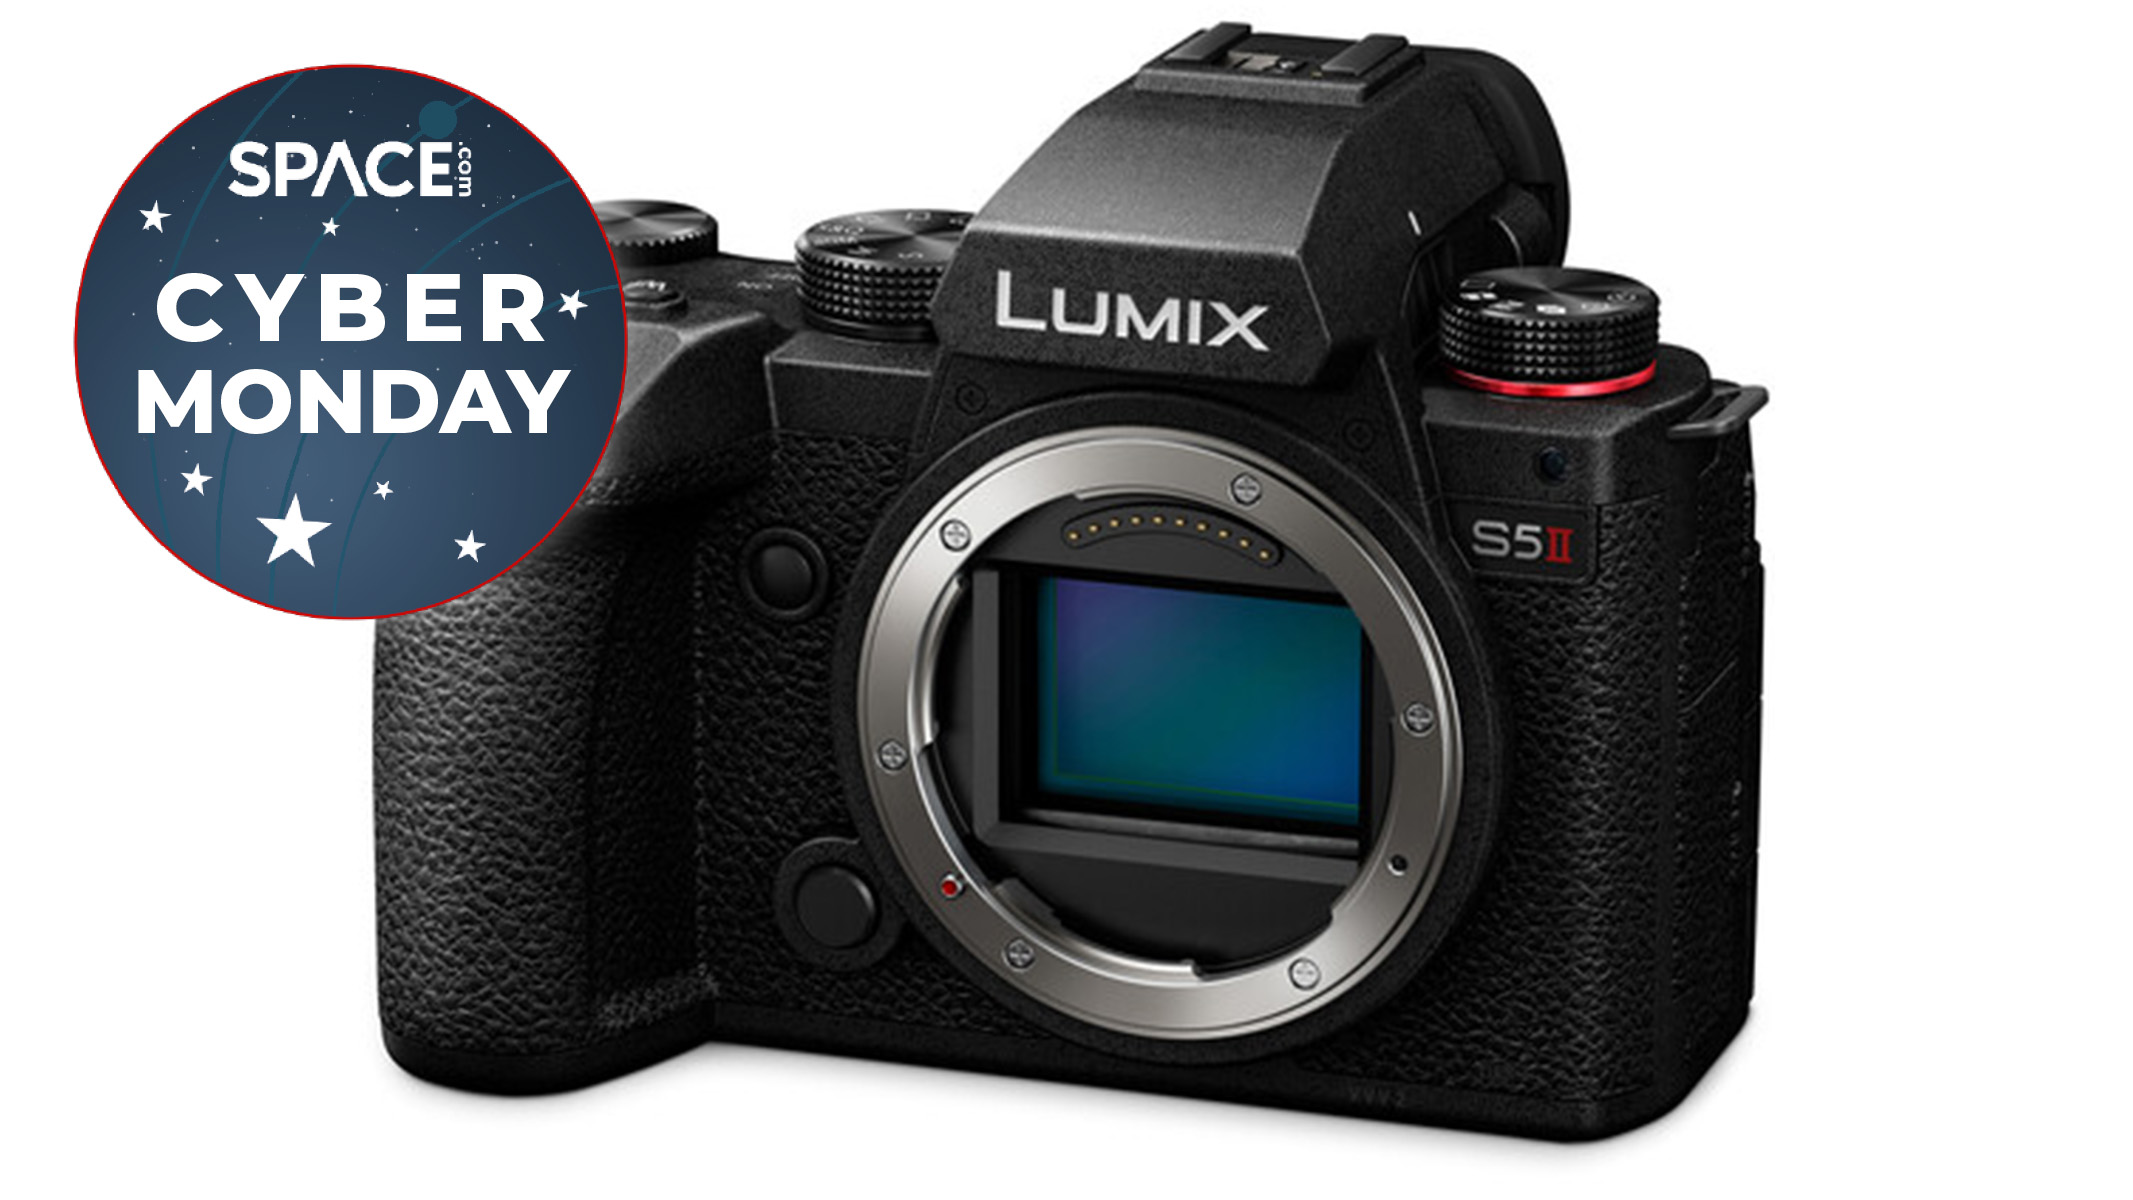 This $300 Panasonic Lumix S5 II saving could be one of the last Cyber Monday camera deals Space